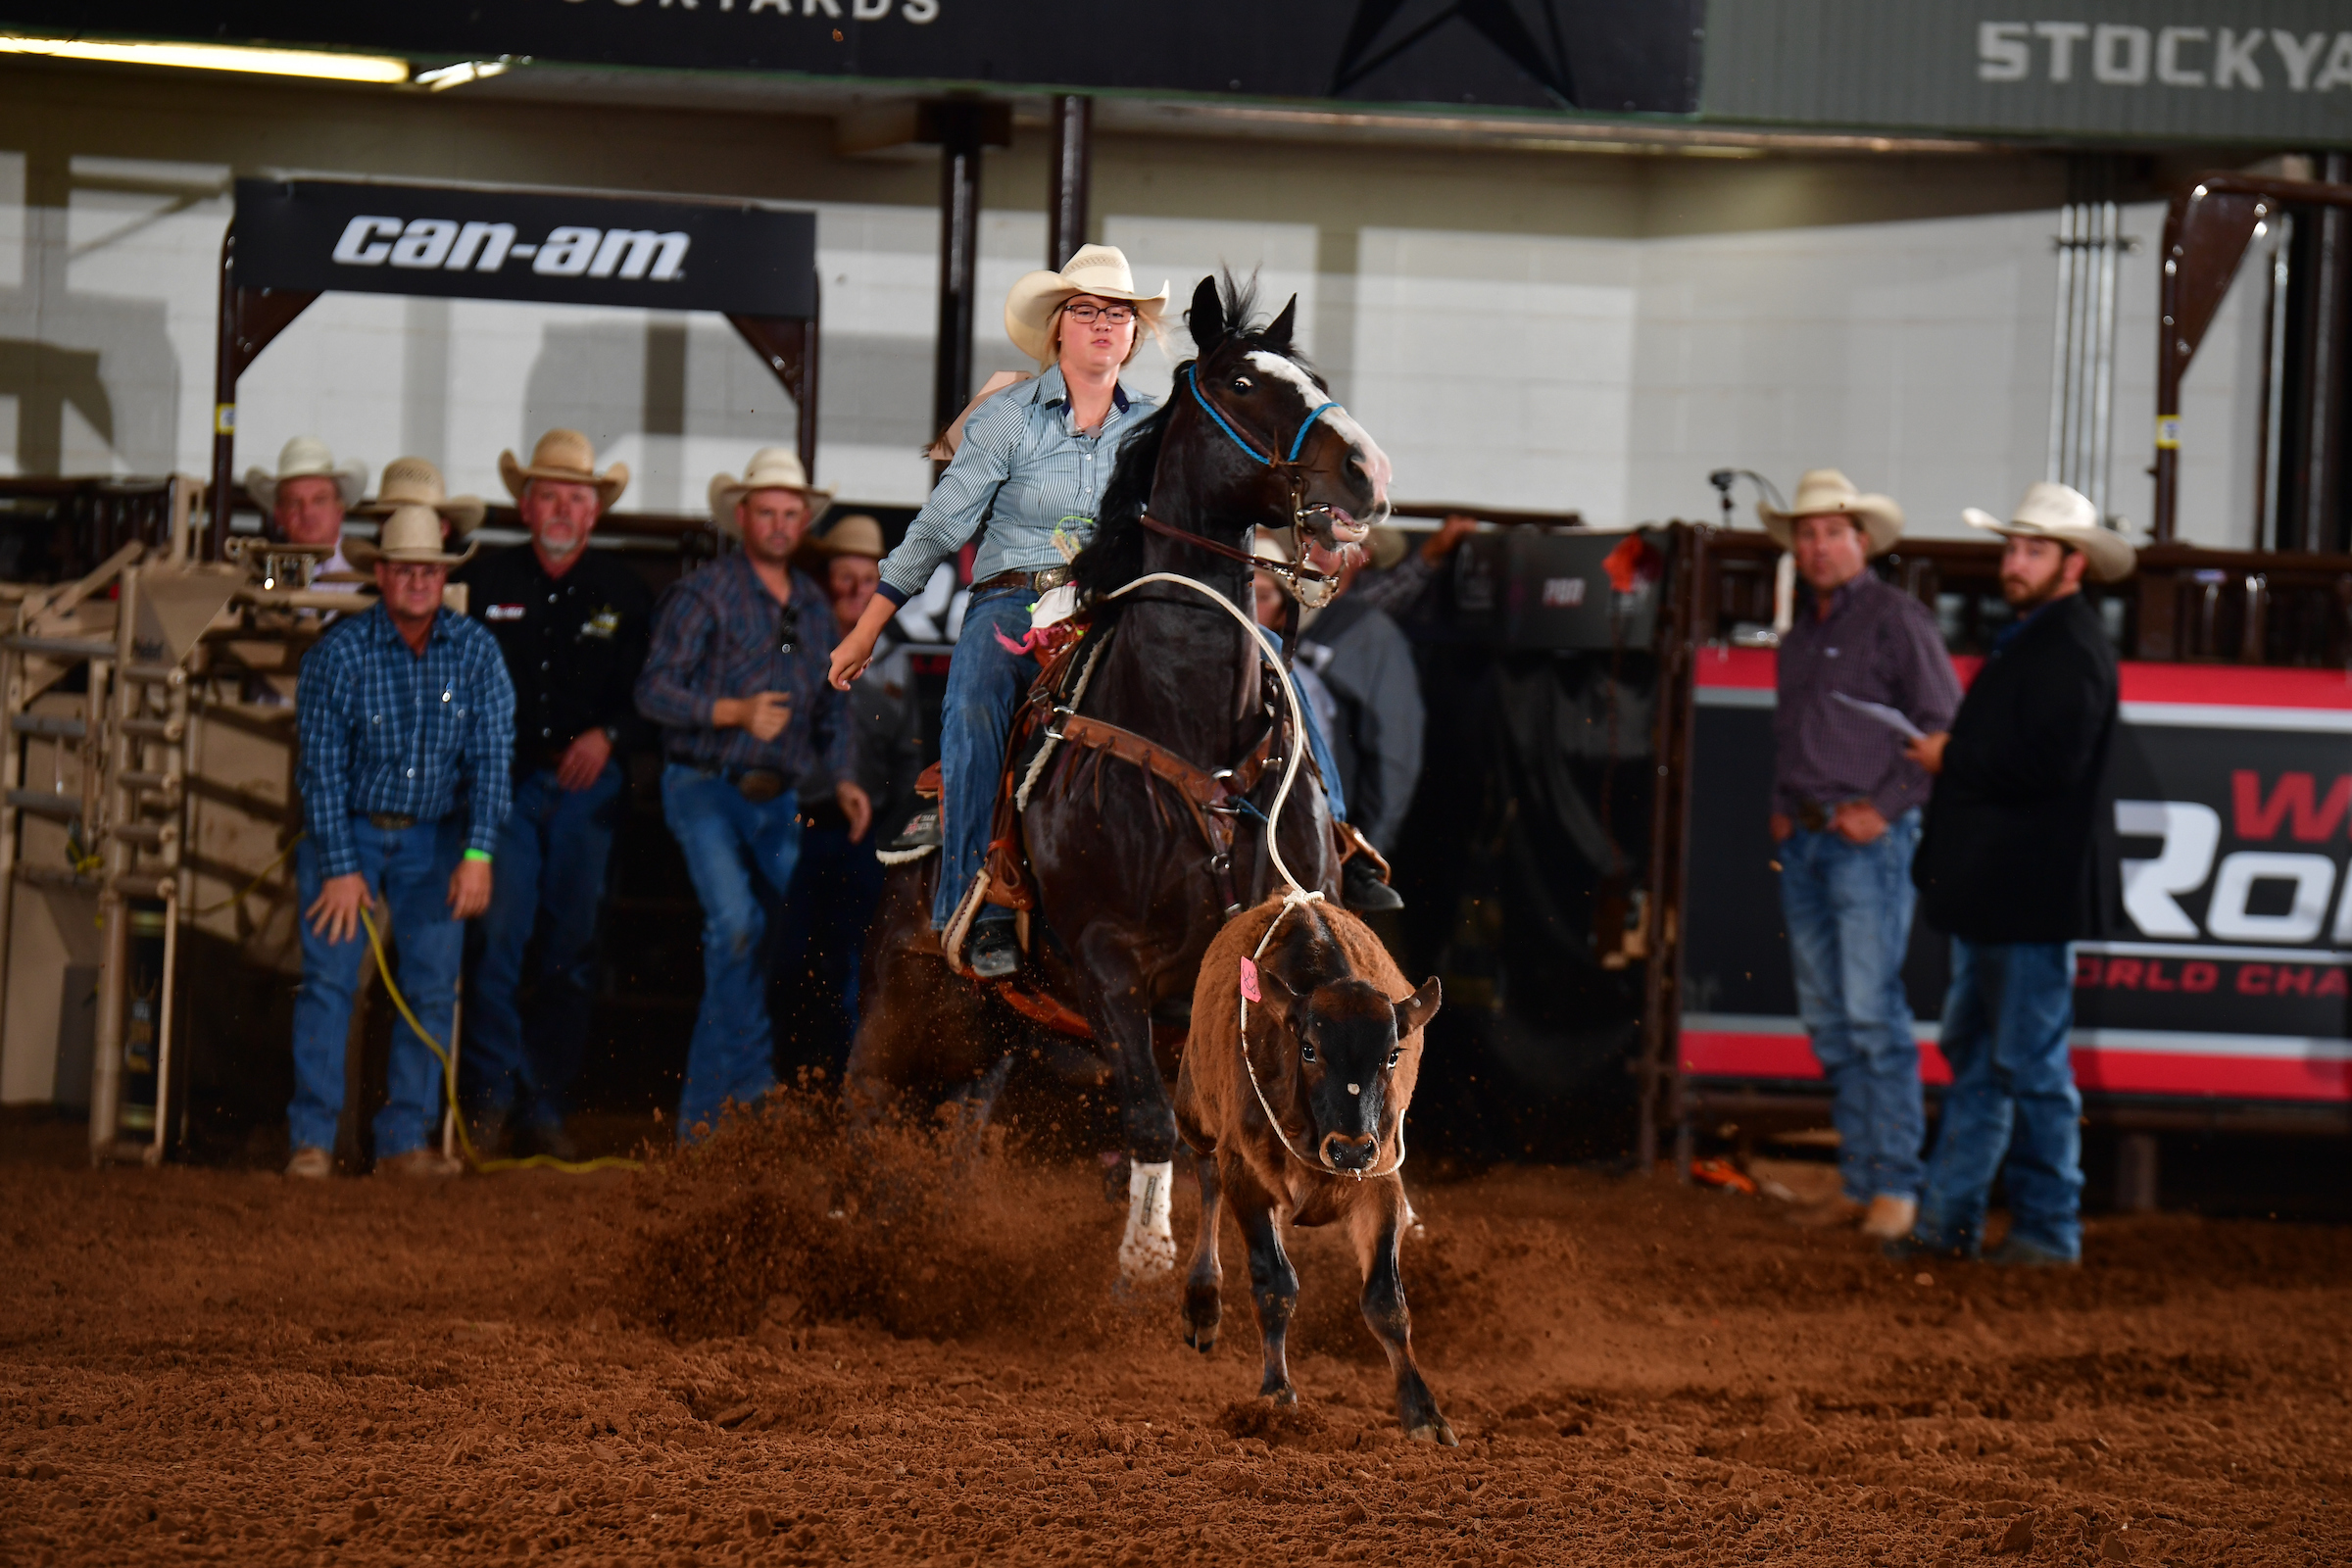 Texas Cowgirl, Amy Orht Dials in on All-Around Title